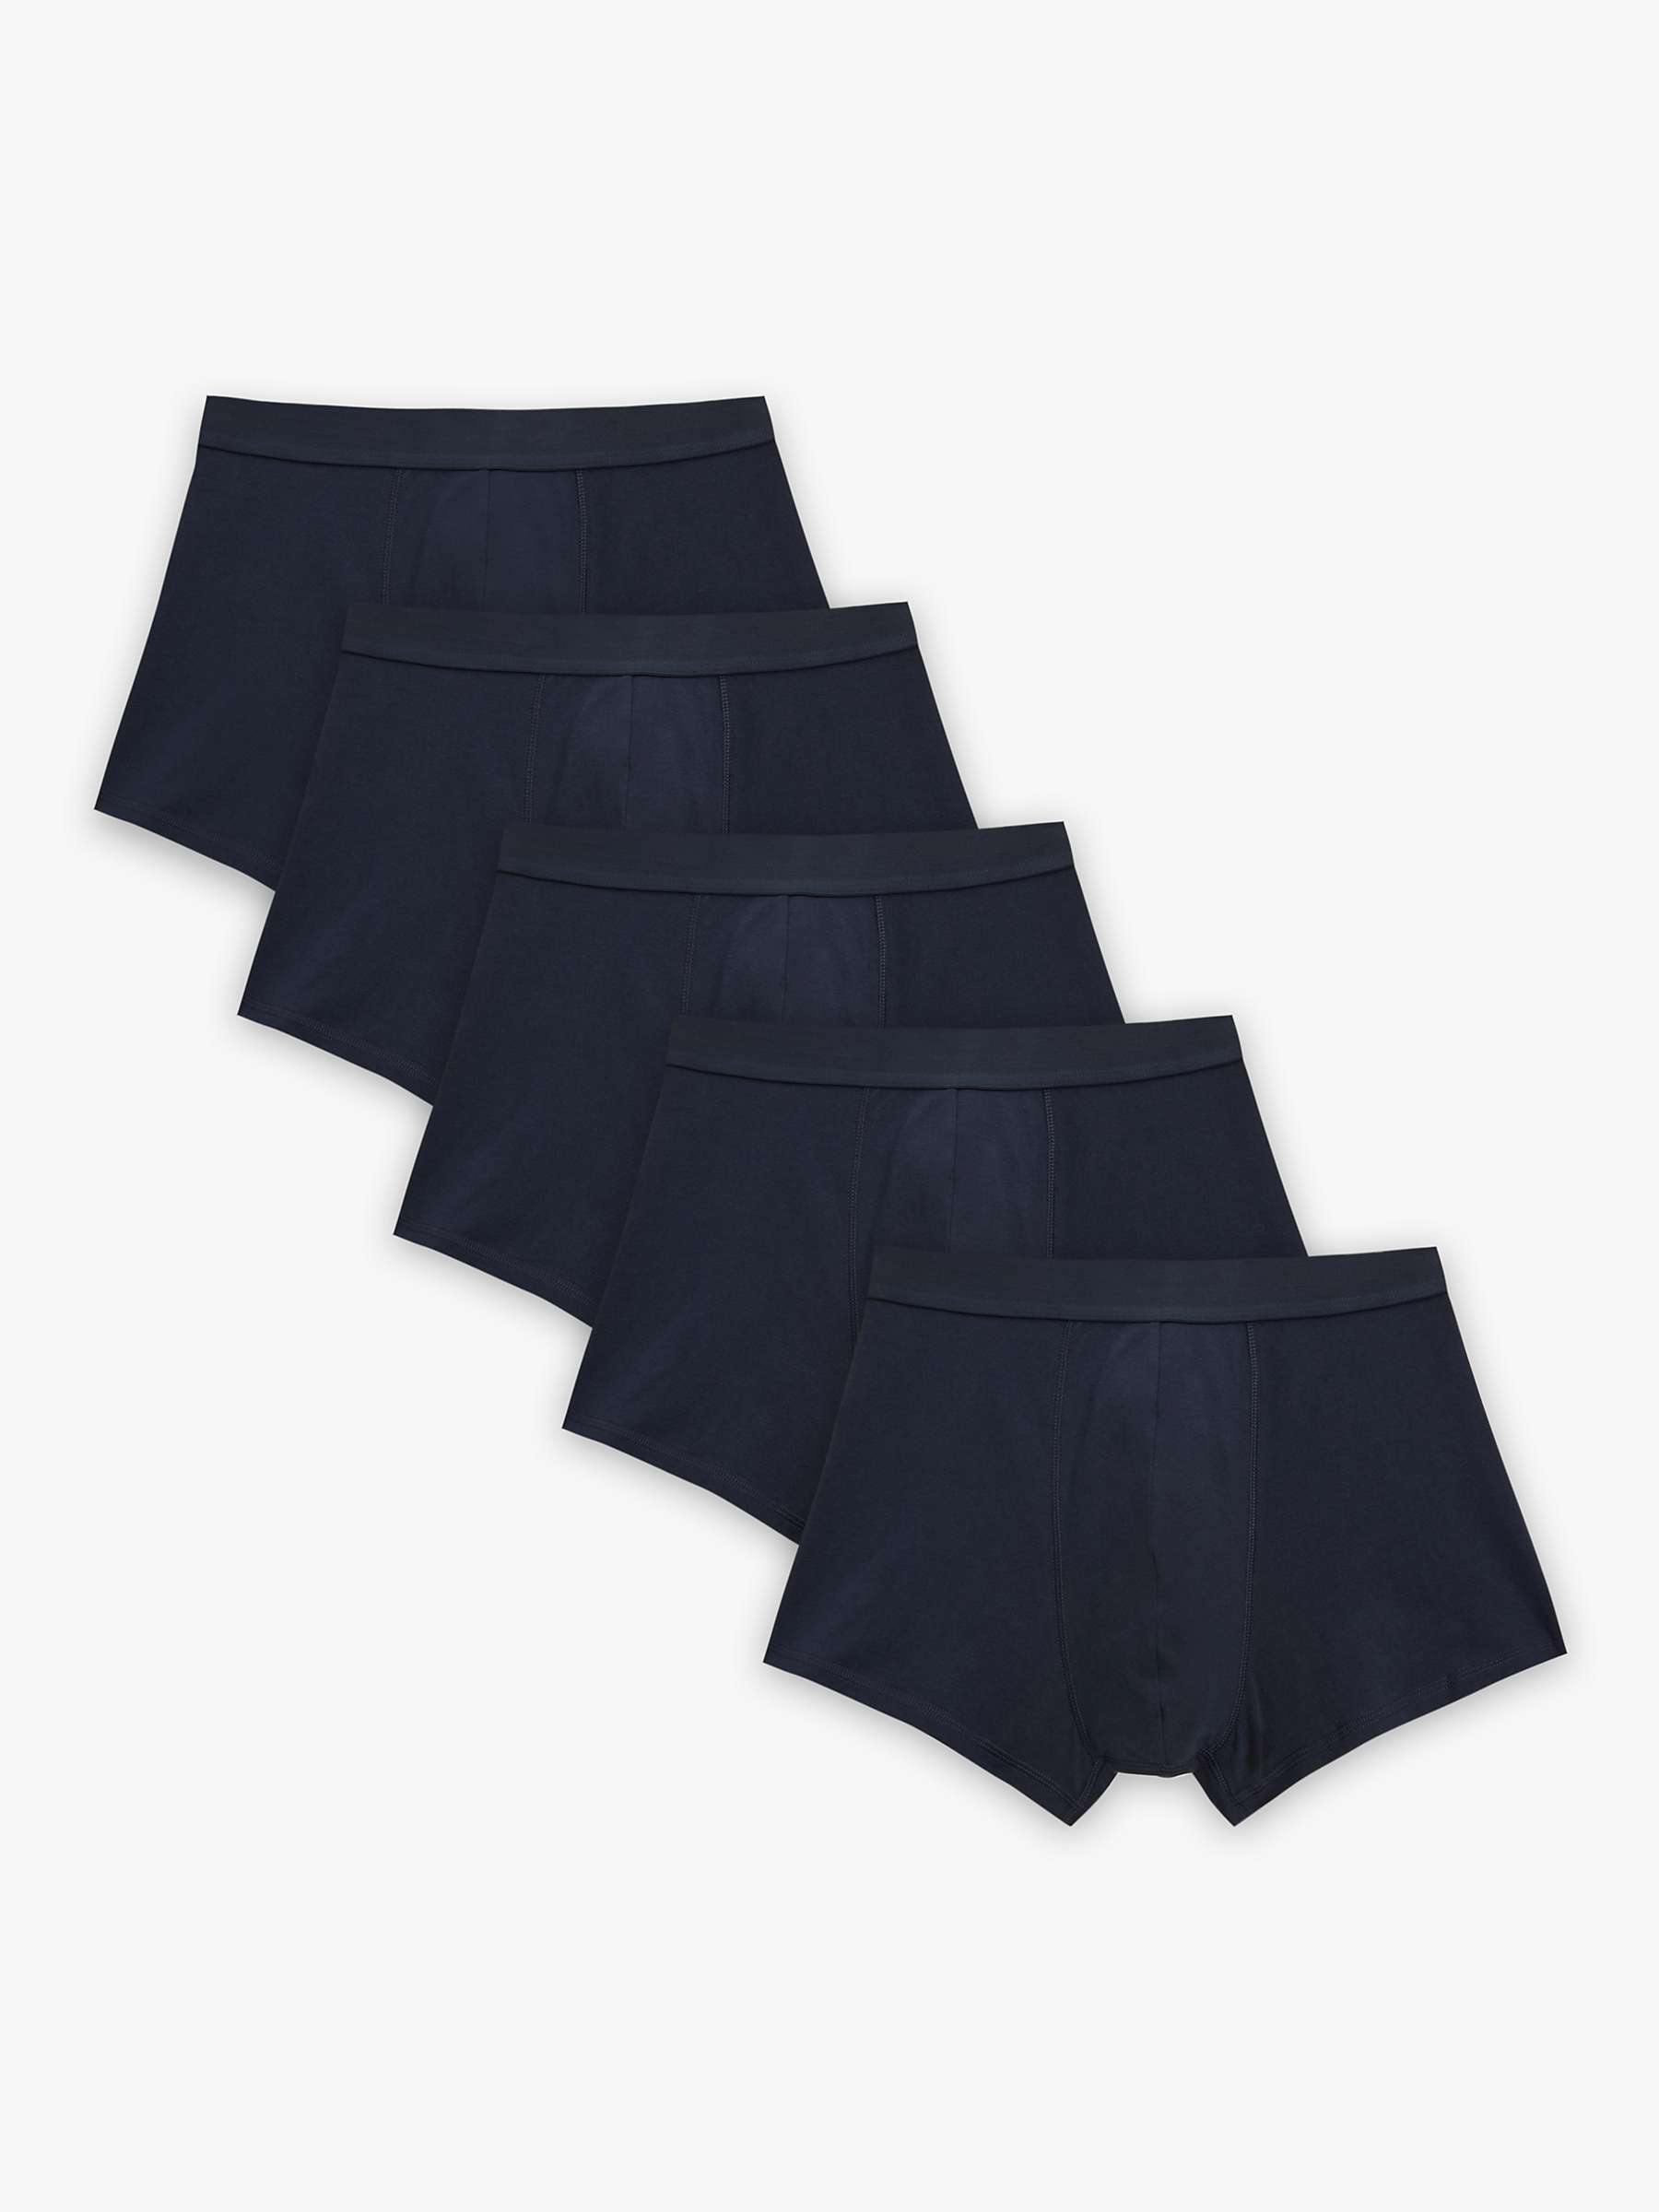 Buy John Lewis ANYDAY Stretch Cotton Plain Trunks, Pack of 5, Navy Online at johnlewis.com